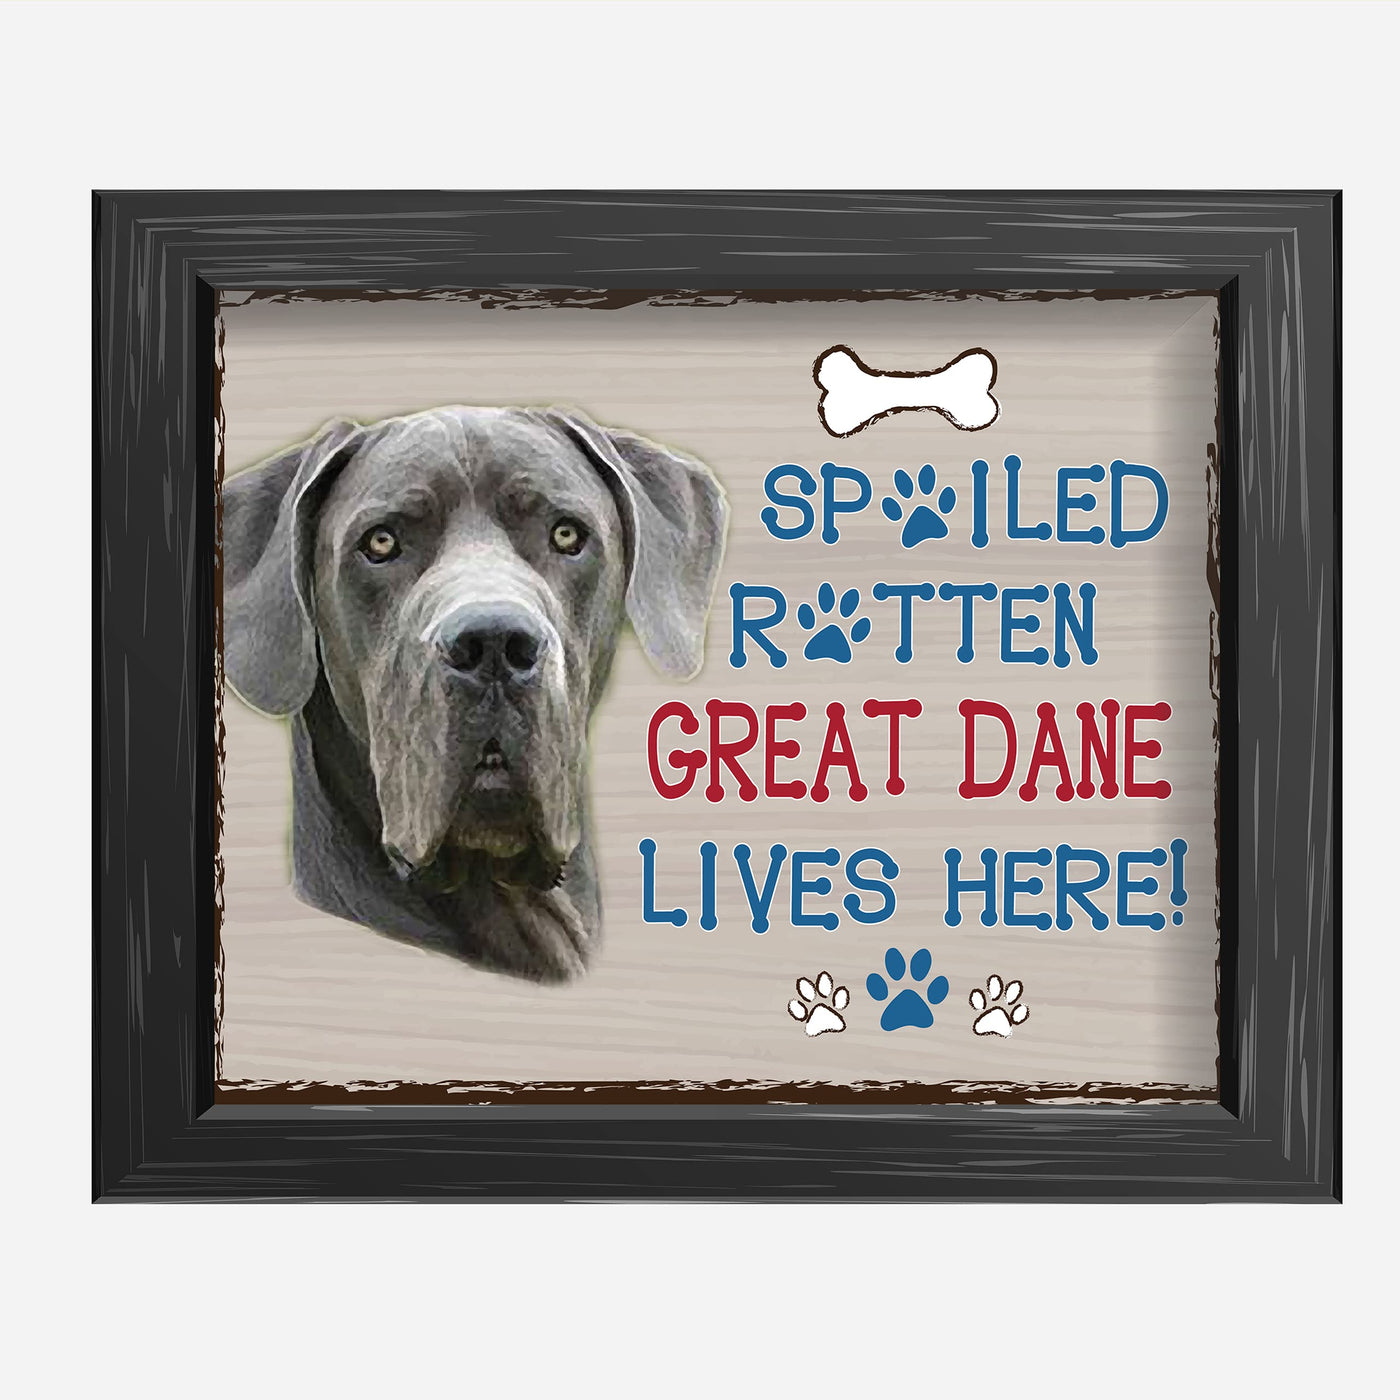 Great Dane-Dog Poster Print-10 x 8" Wall Decor Sign-Ready To Frame."A Spoiled Rotten Great Dane Lives Here". Perfect Pet Wall Art for Home-Kitchen-Cave-Bar-Garage. Great Gift for Great Dane Owners!